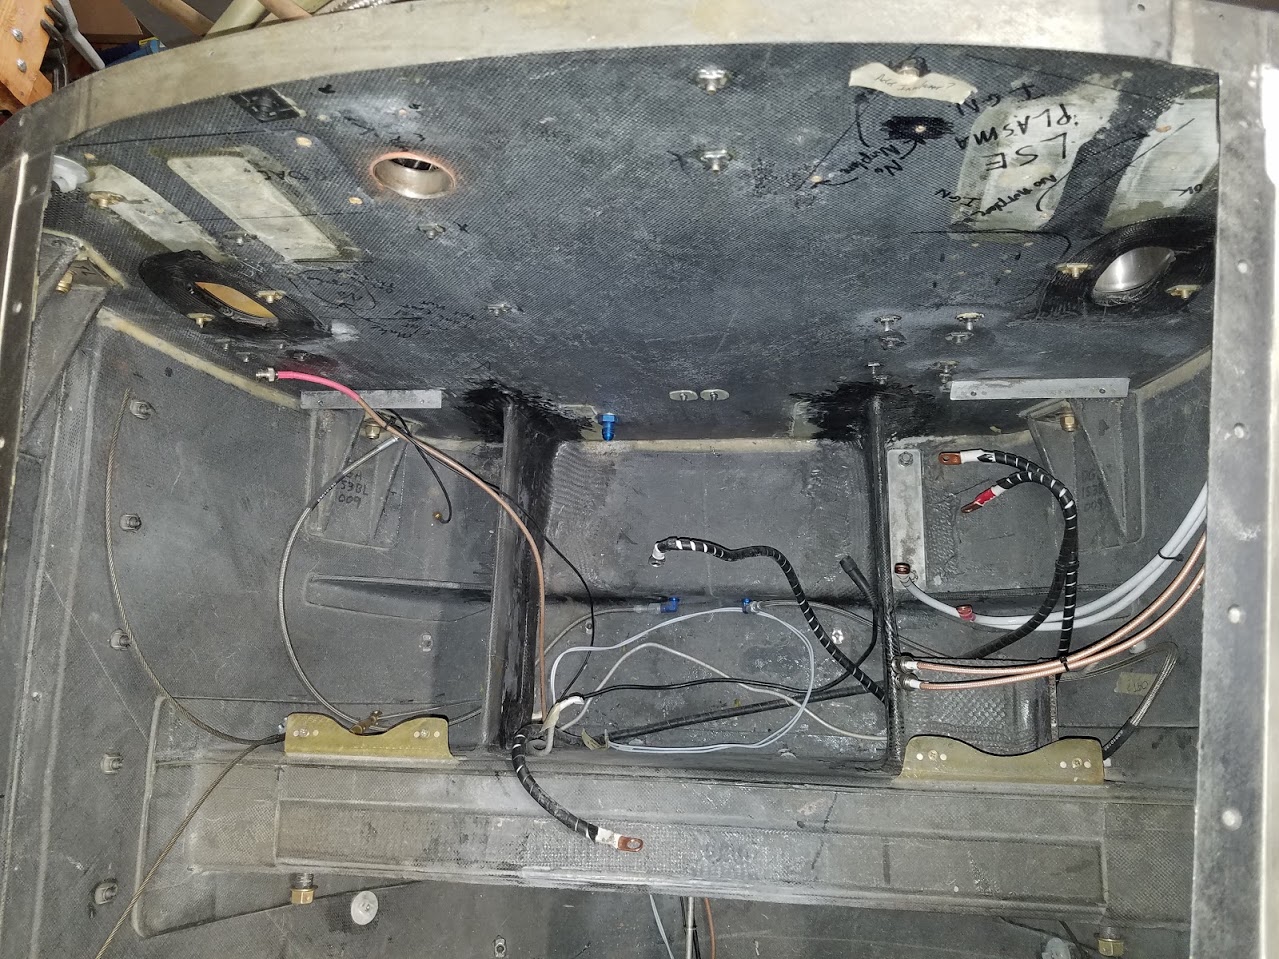 Fuel bay - wiring removed